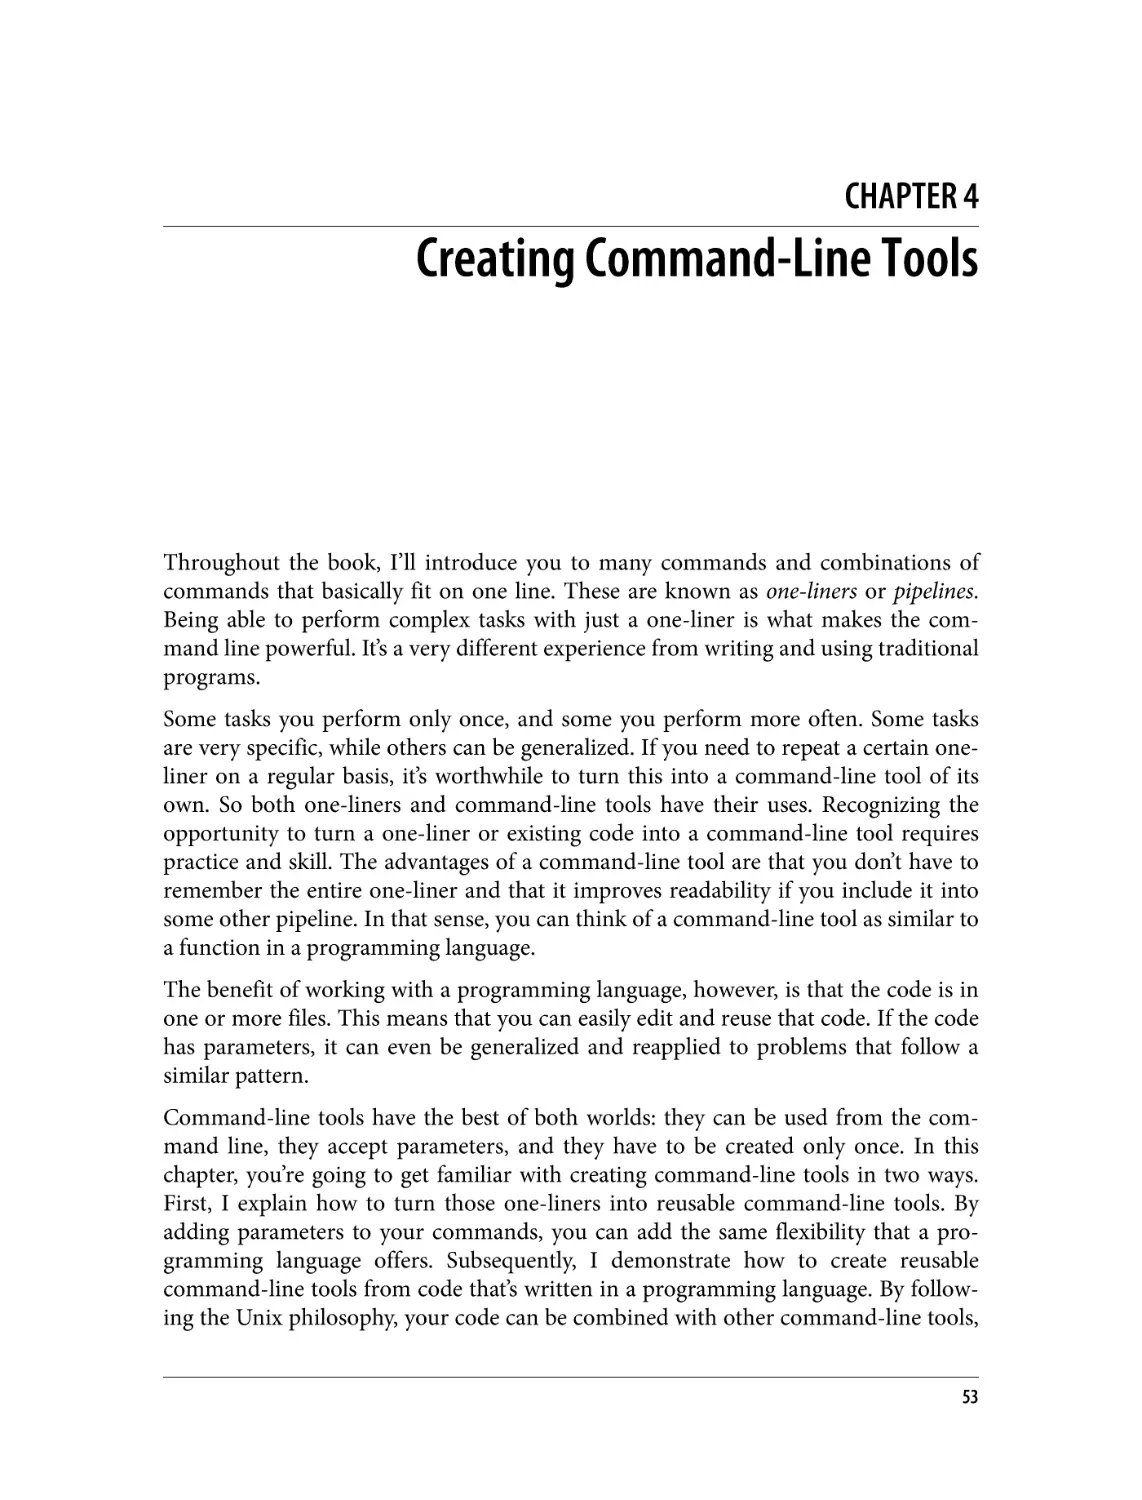 Chapter 4. Creating Command-Line Tools